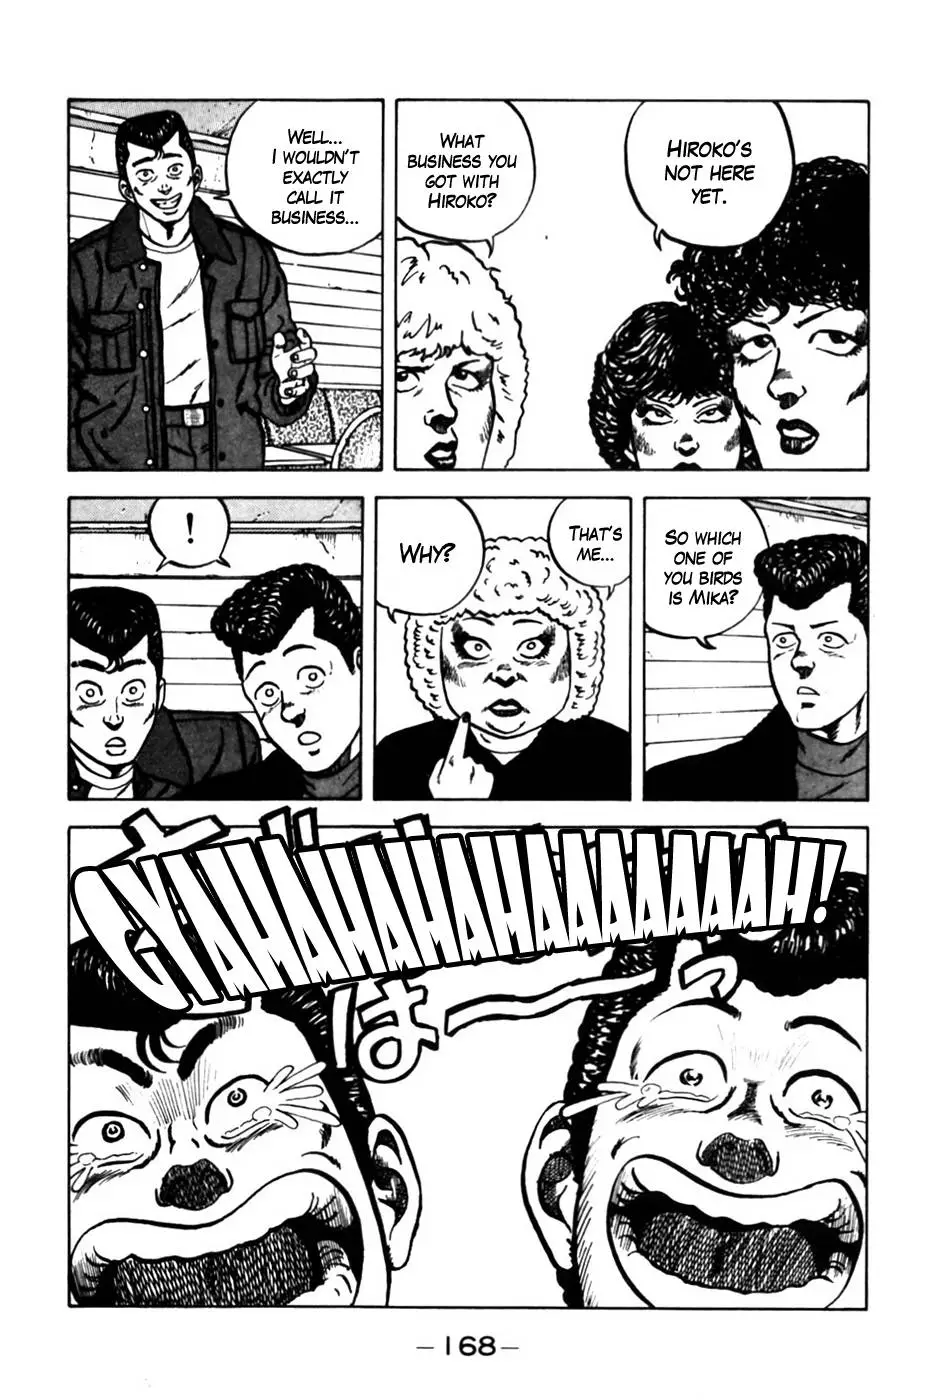 Be-Bop High School - 8 page p_00009